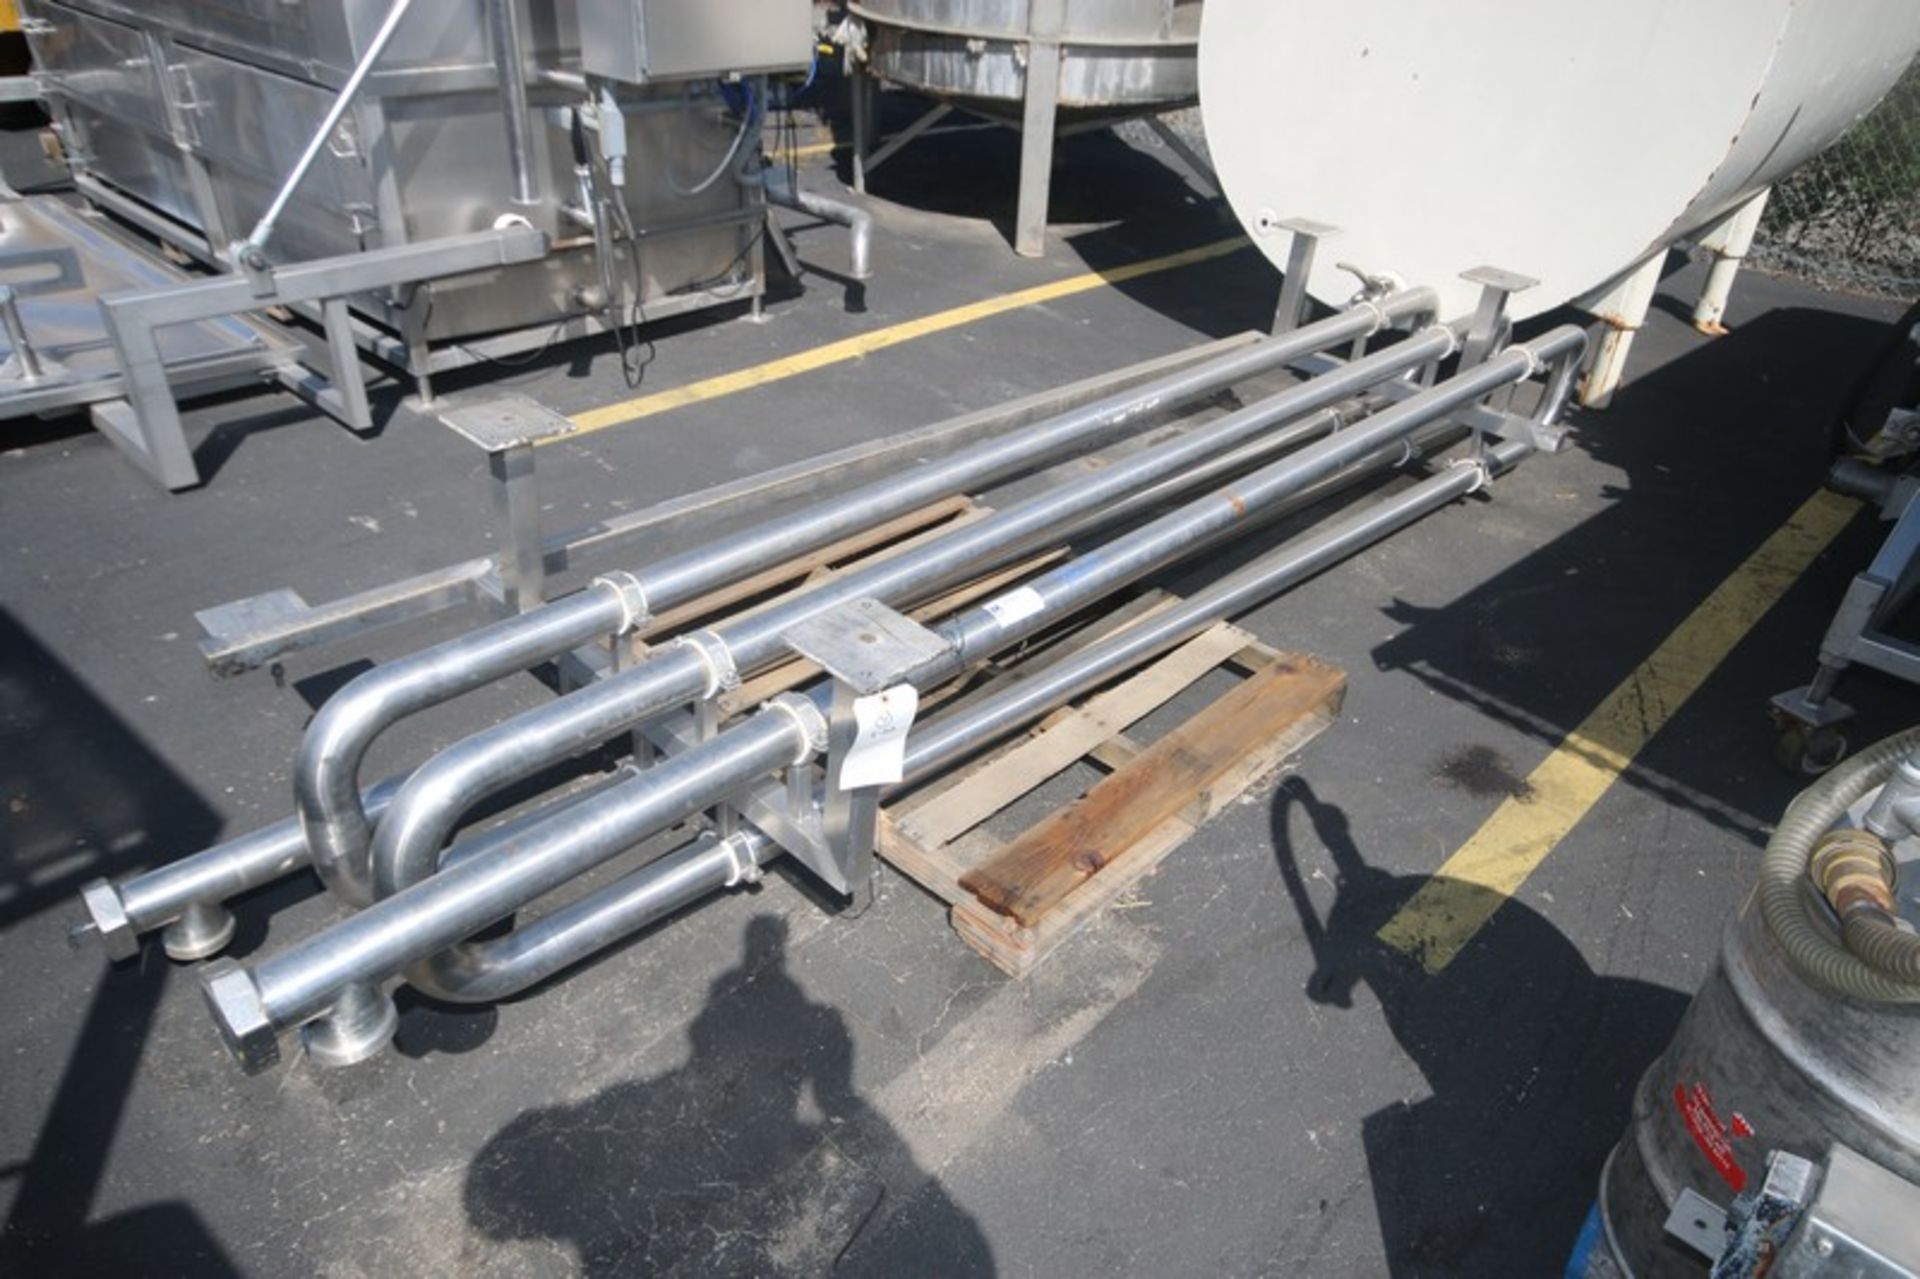 3-Pass 3" S/S Holding Tube,Aprox. 11' L, Mounted on S/S Frame (INV#69014)(LOCATED AT MDG AUCTION